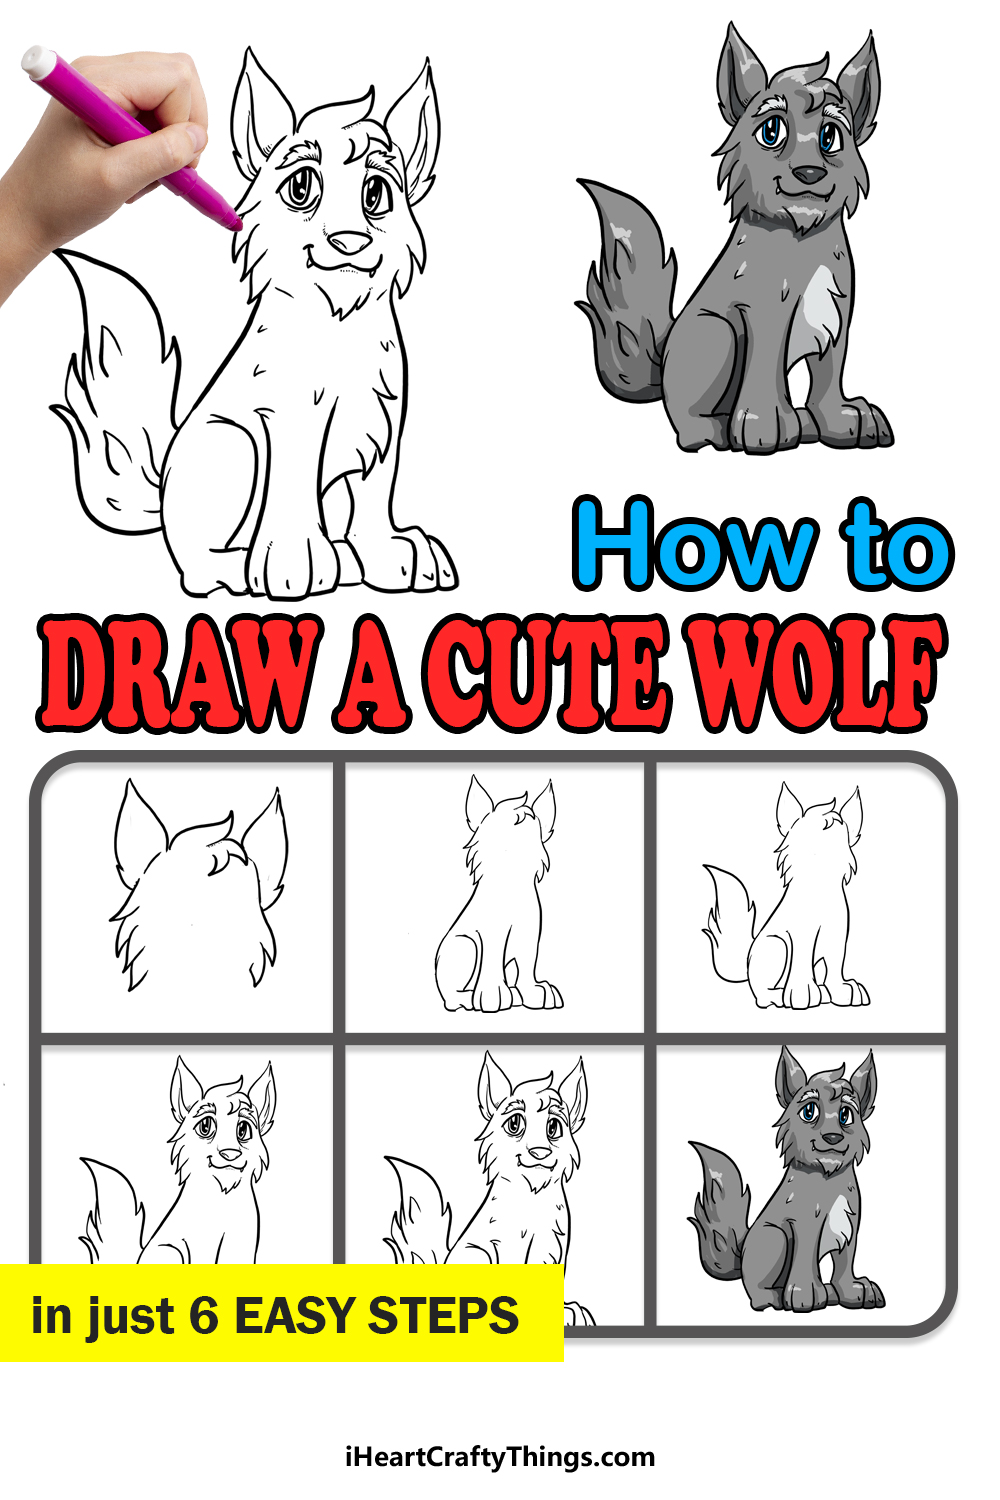 How to Draw A Cute Wolf step by step guide